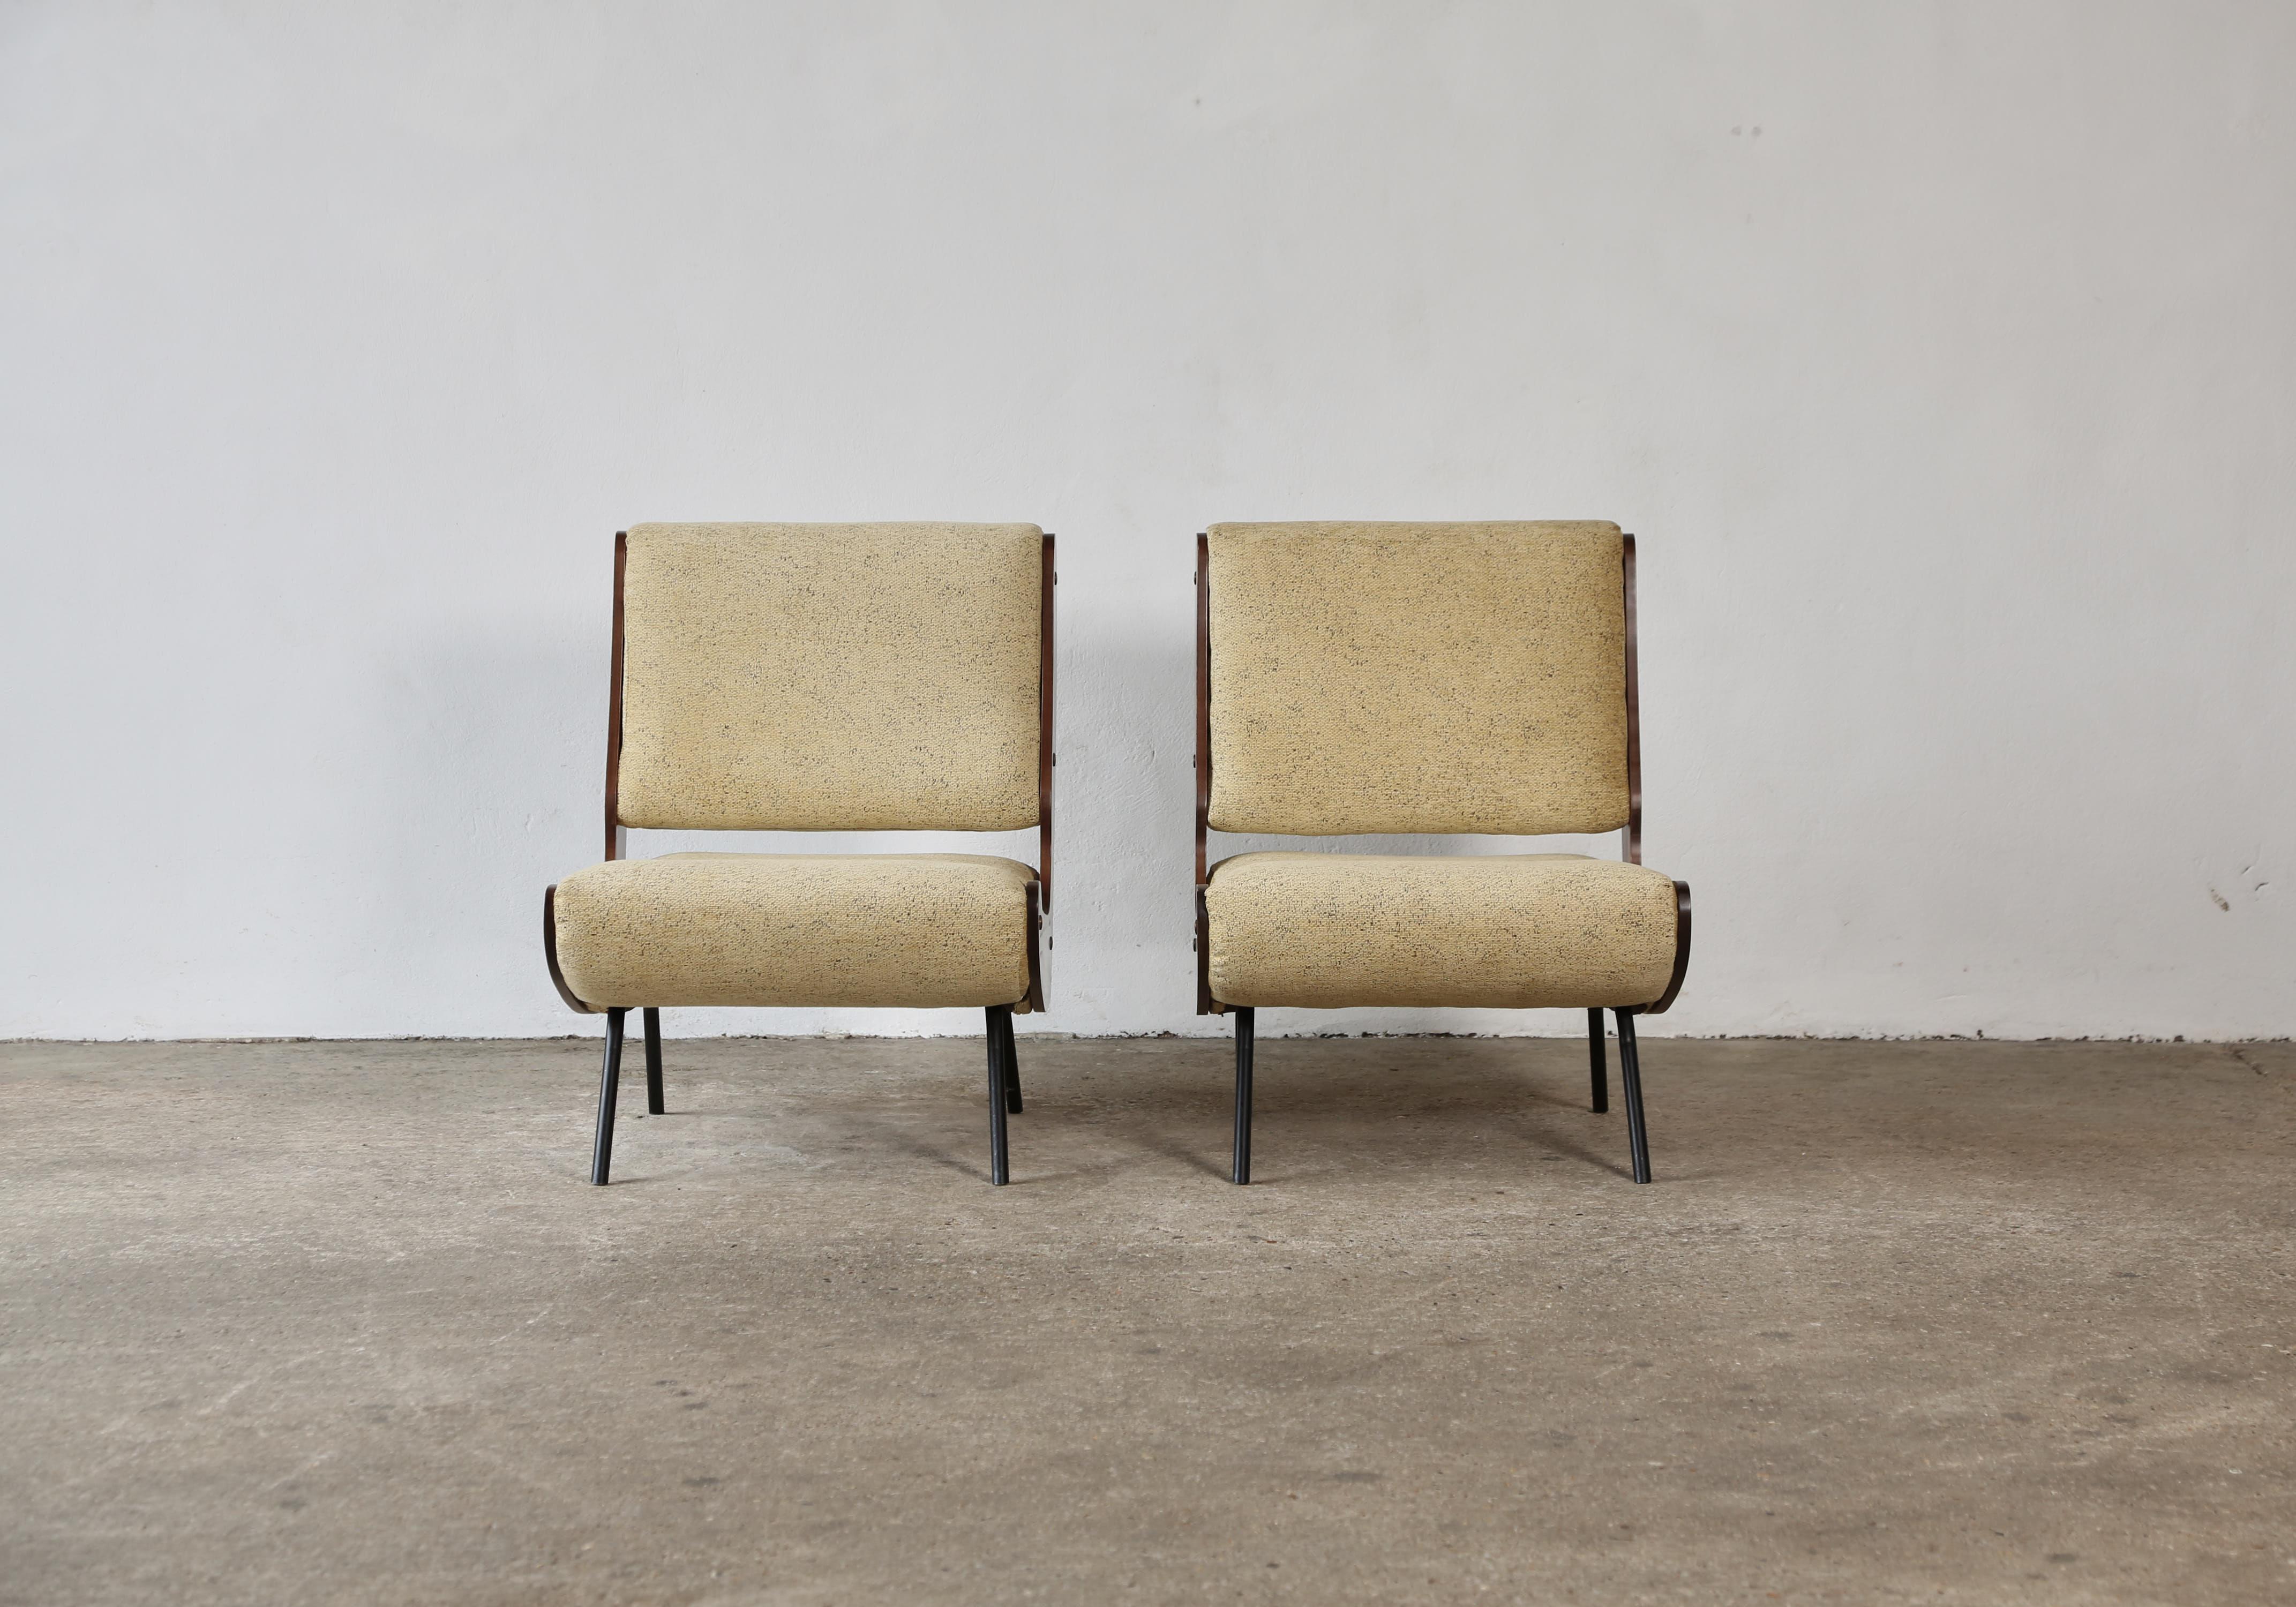 Gianfranco Frattini 836 Lounge Chairs, Cassina, Italy, 1950s For Sale 5